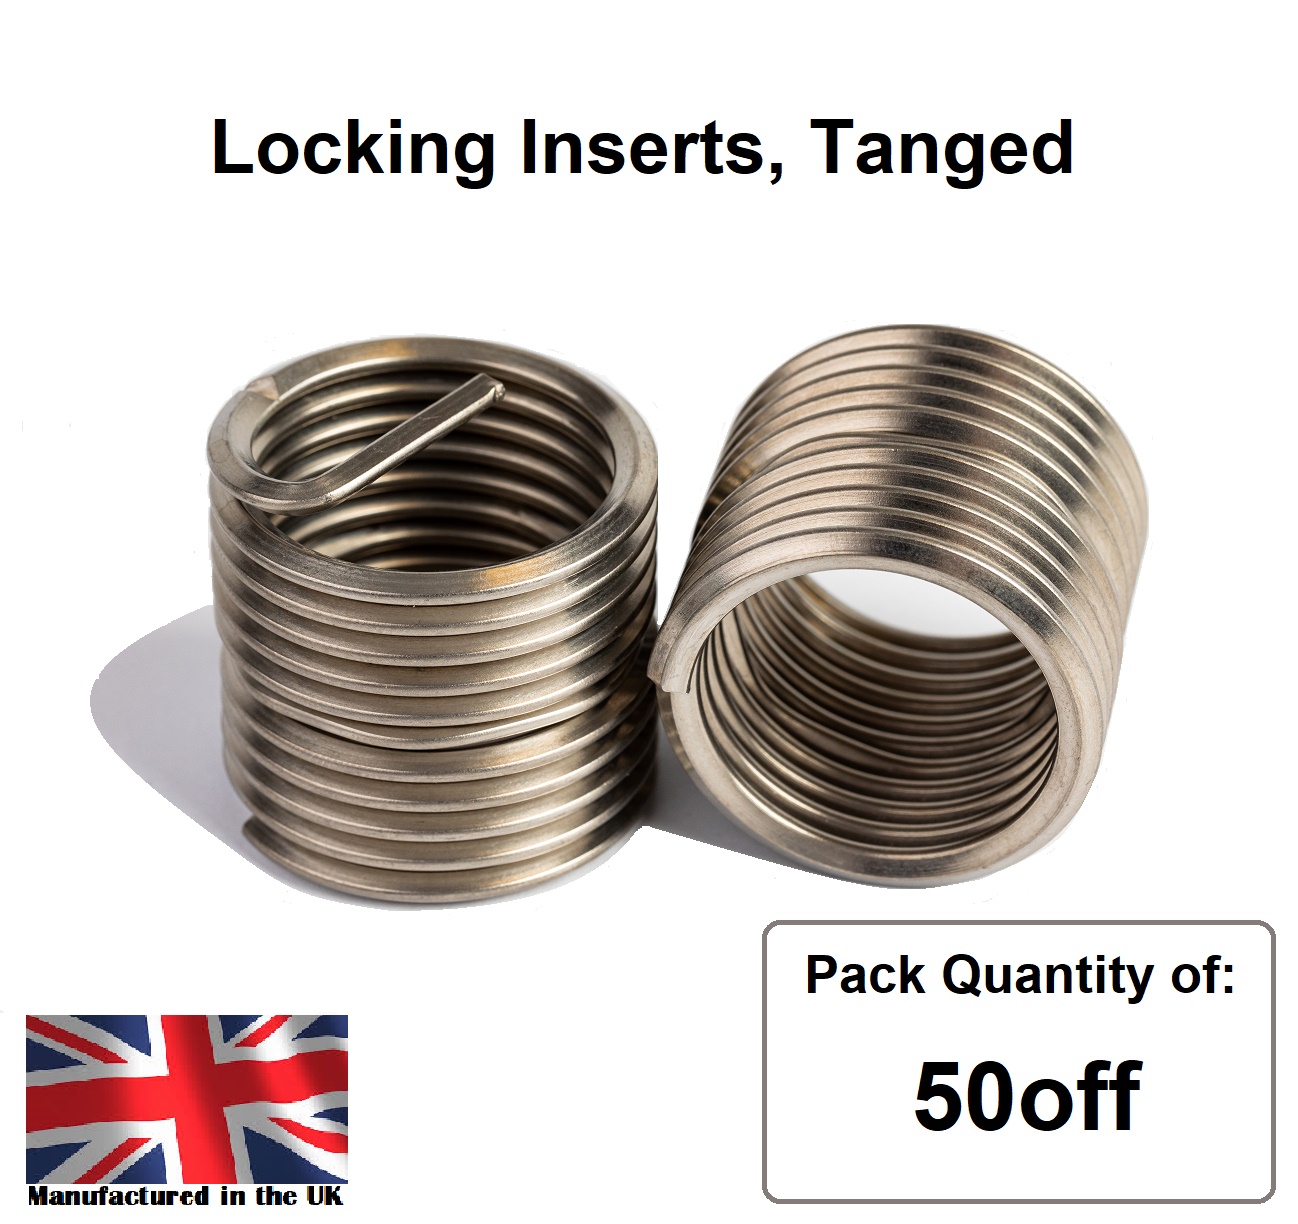 M2.5 x 0.45 x 2.5D Metric Coarse, LOCKING, Tanged, Wire Thread Repair Insert, 304/A2 Stainless (Pack 50)